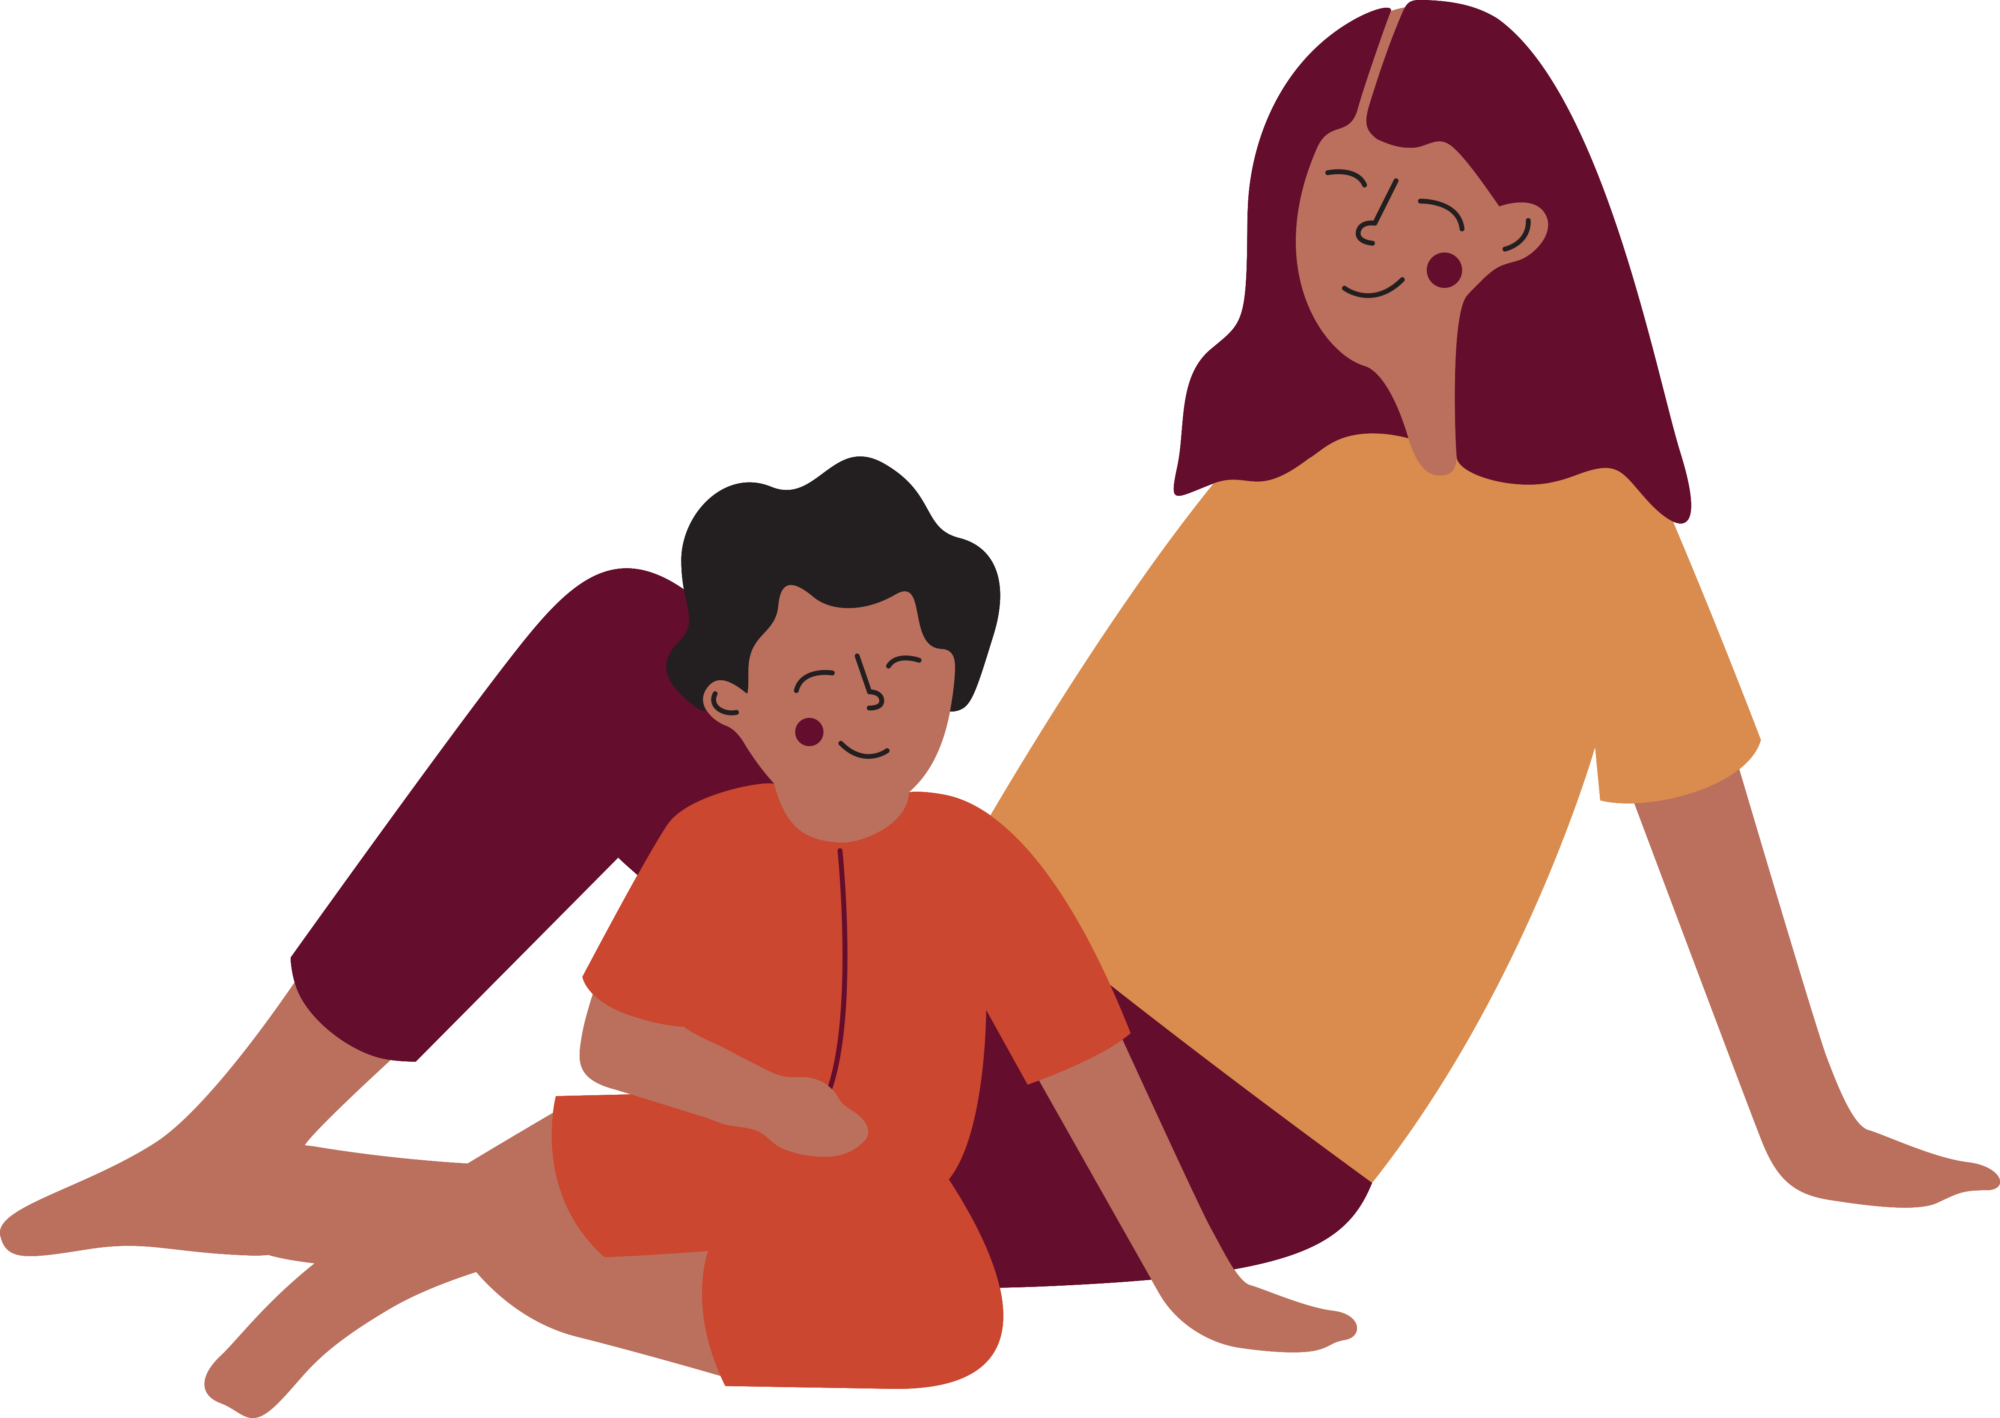 An illustration of a mother sitting on the floor alongside her child